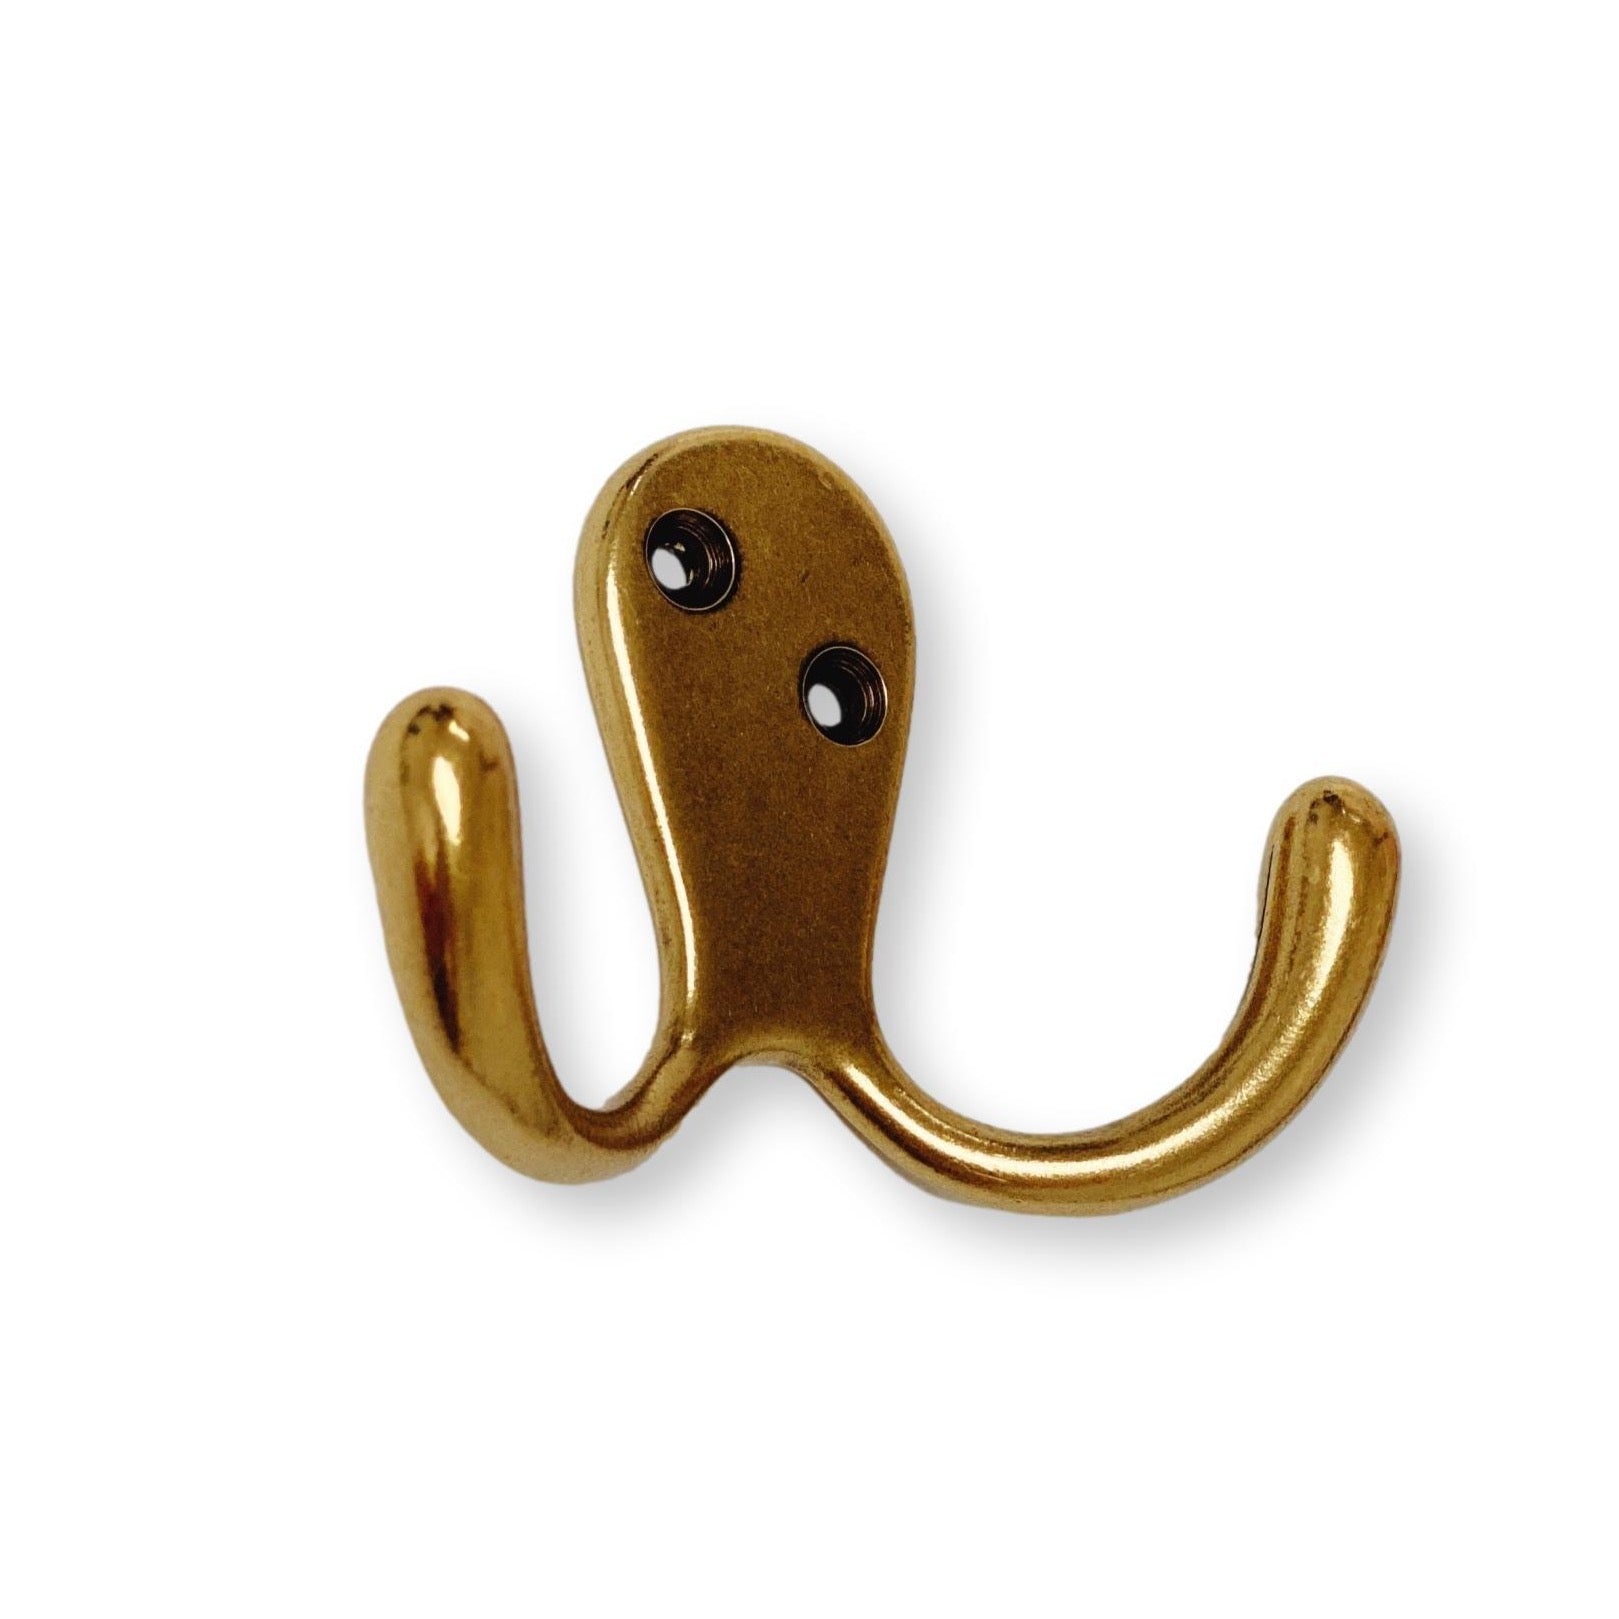 Hat hook - Polished brass with lacquer - 120 mm - Model 90 - Hooks